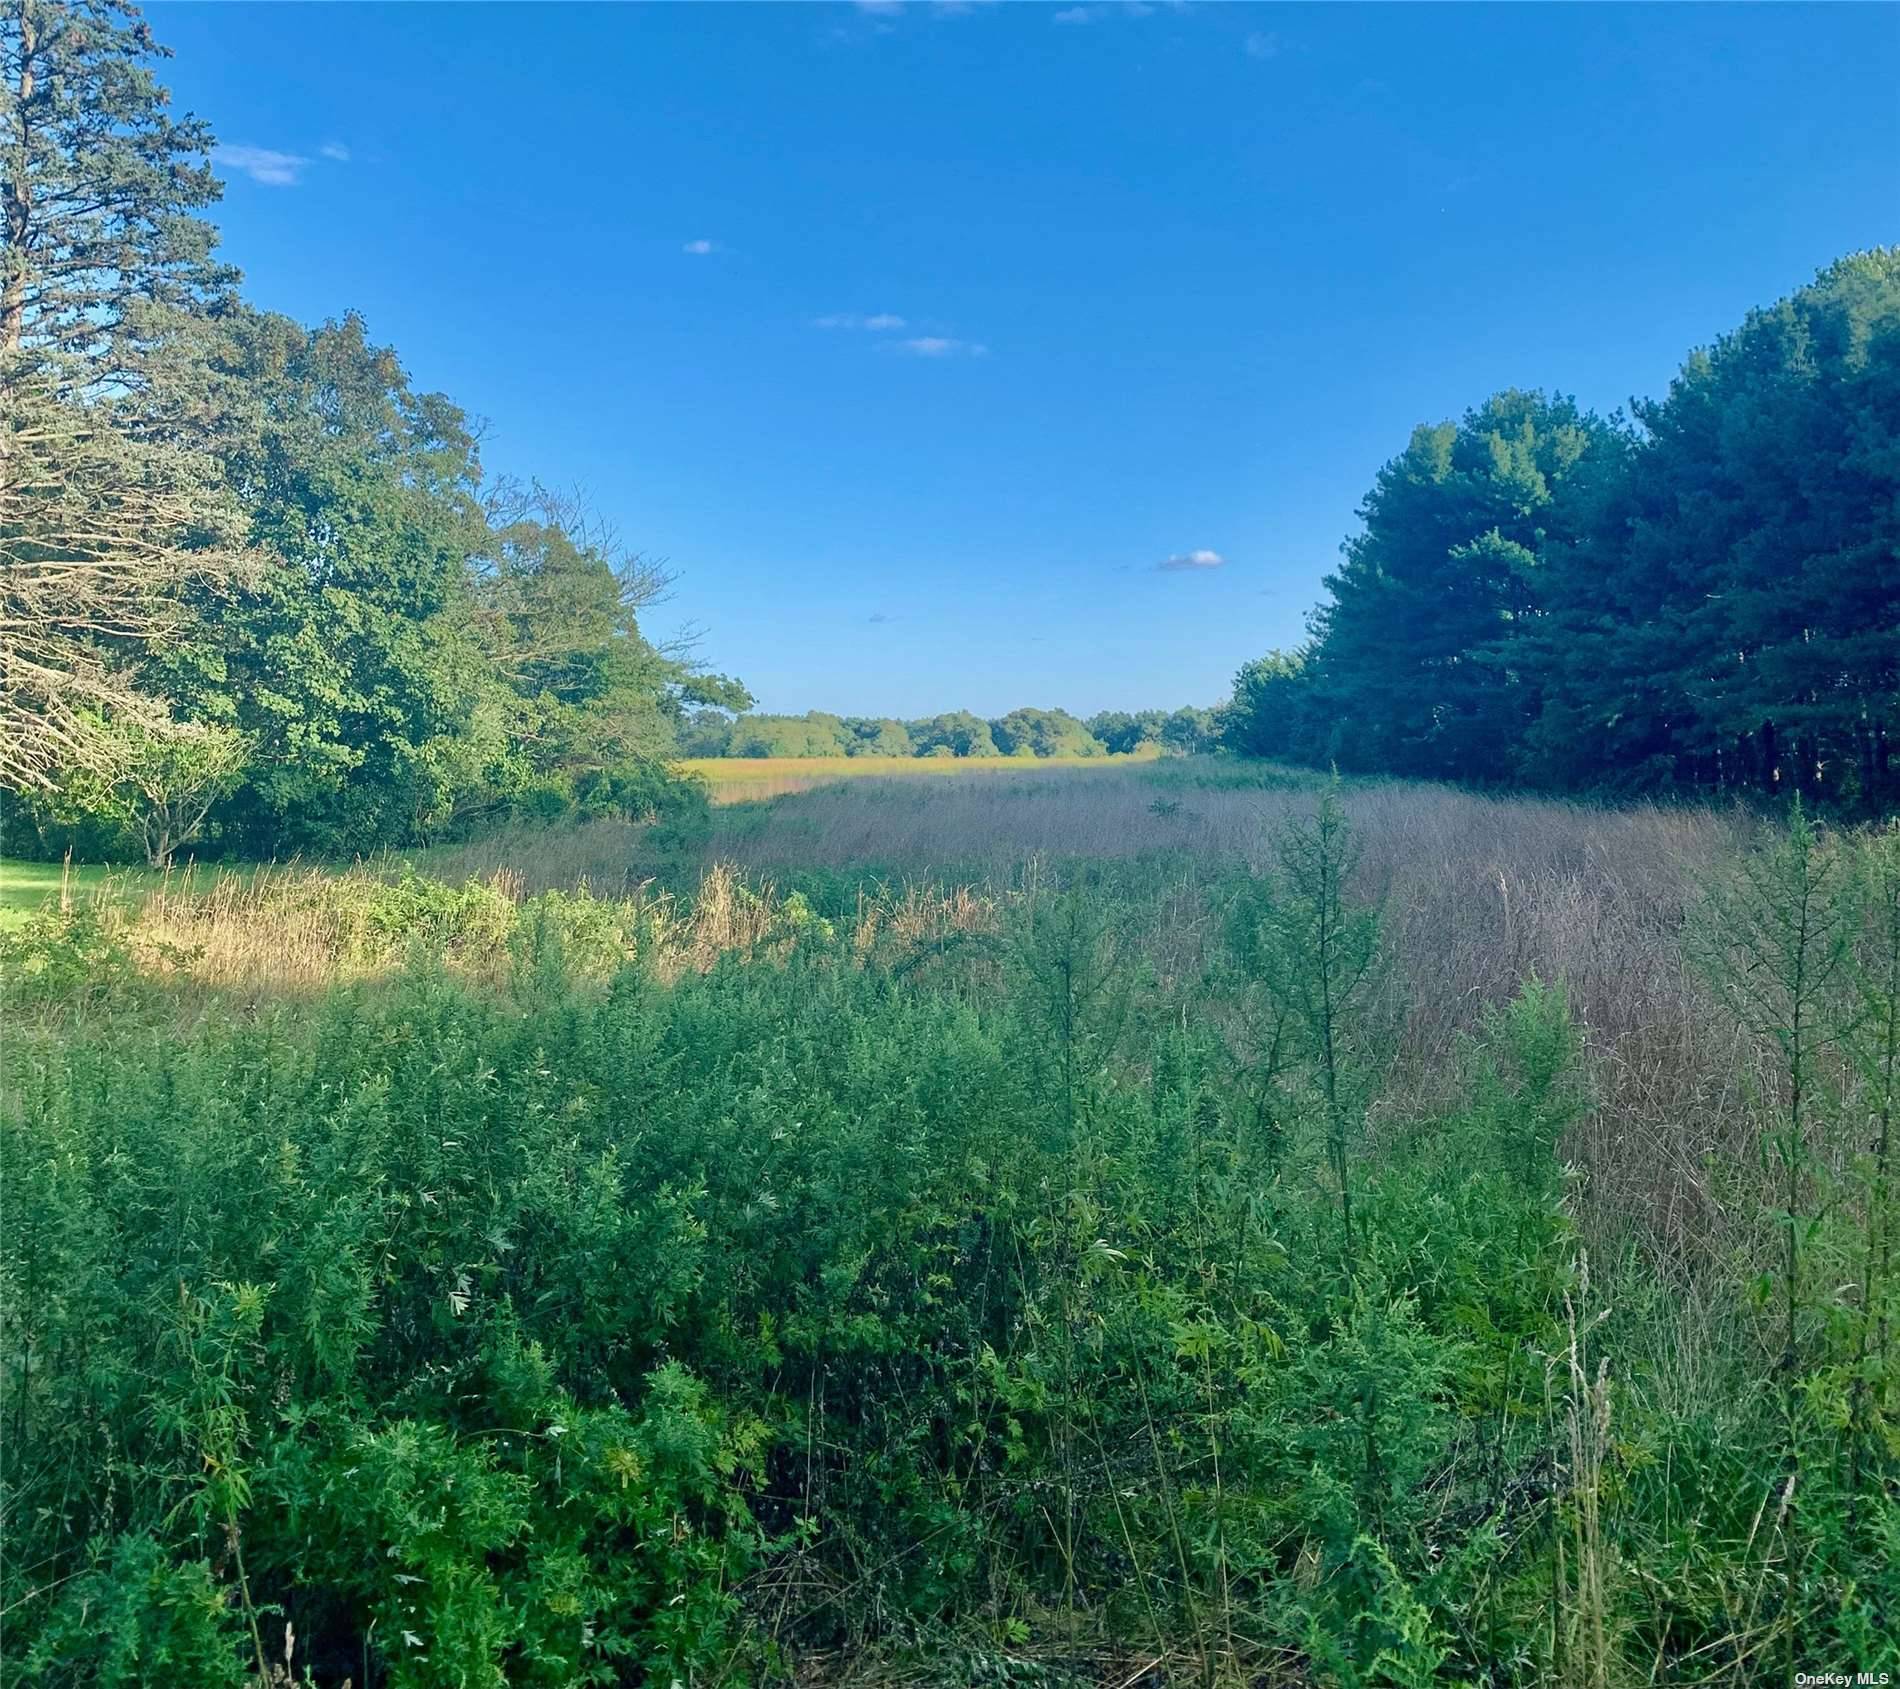 9. 5 Acres of Prime North Fork Farmland Agricultural Use w 150 feet of Frontage on Main Road, NYS Rt 25 in Rural Corridor.